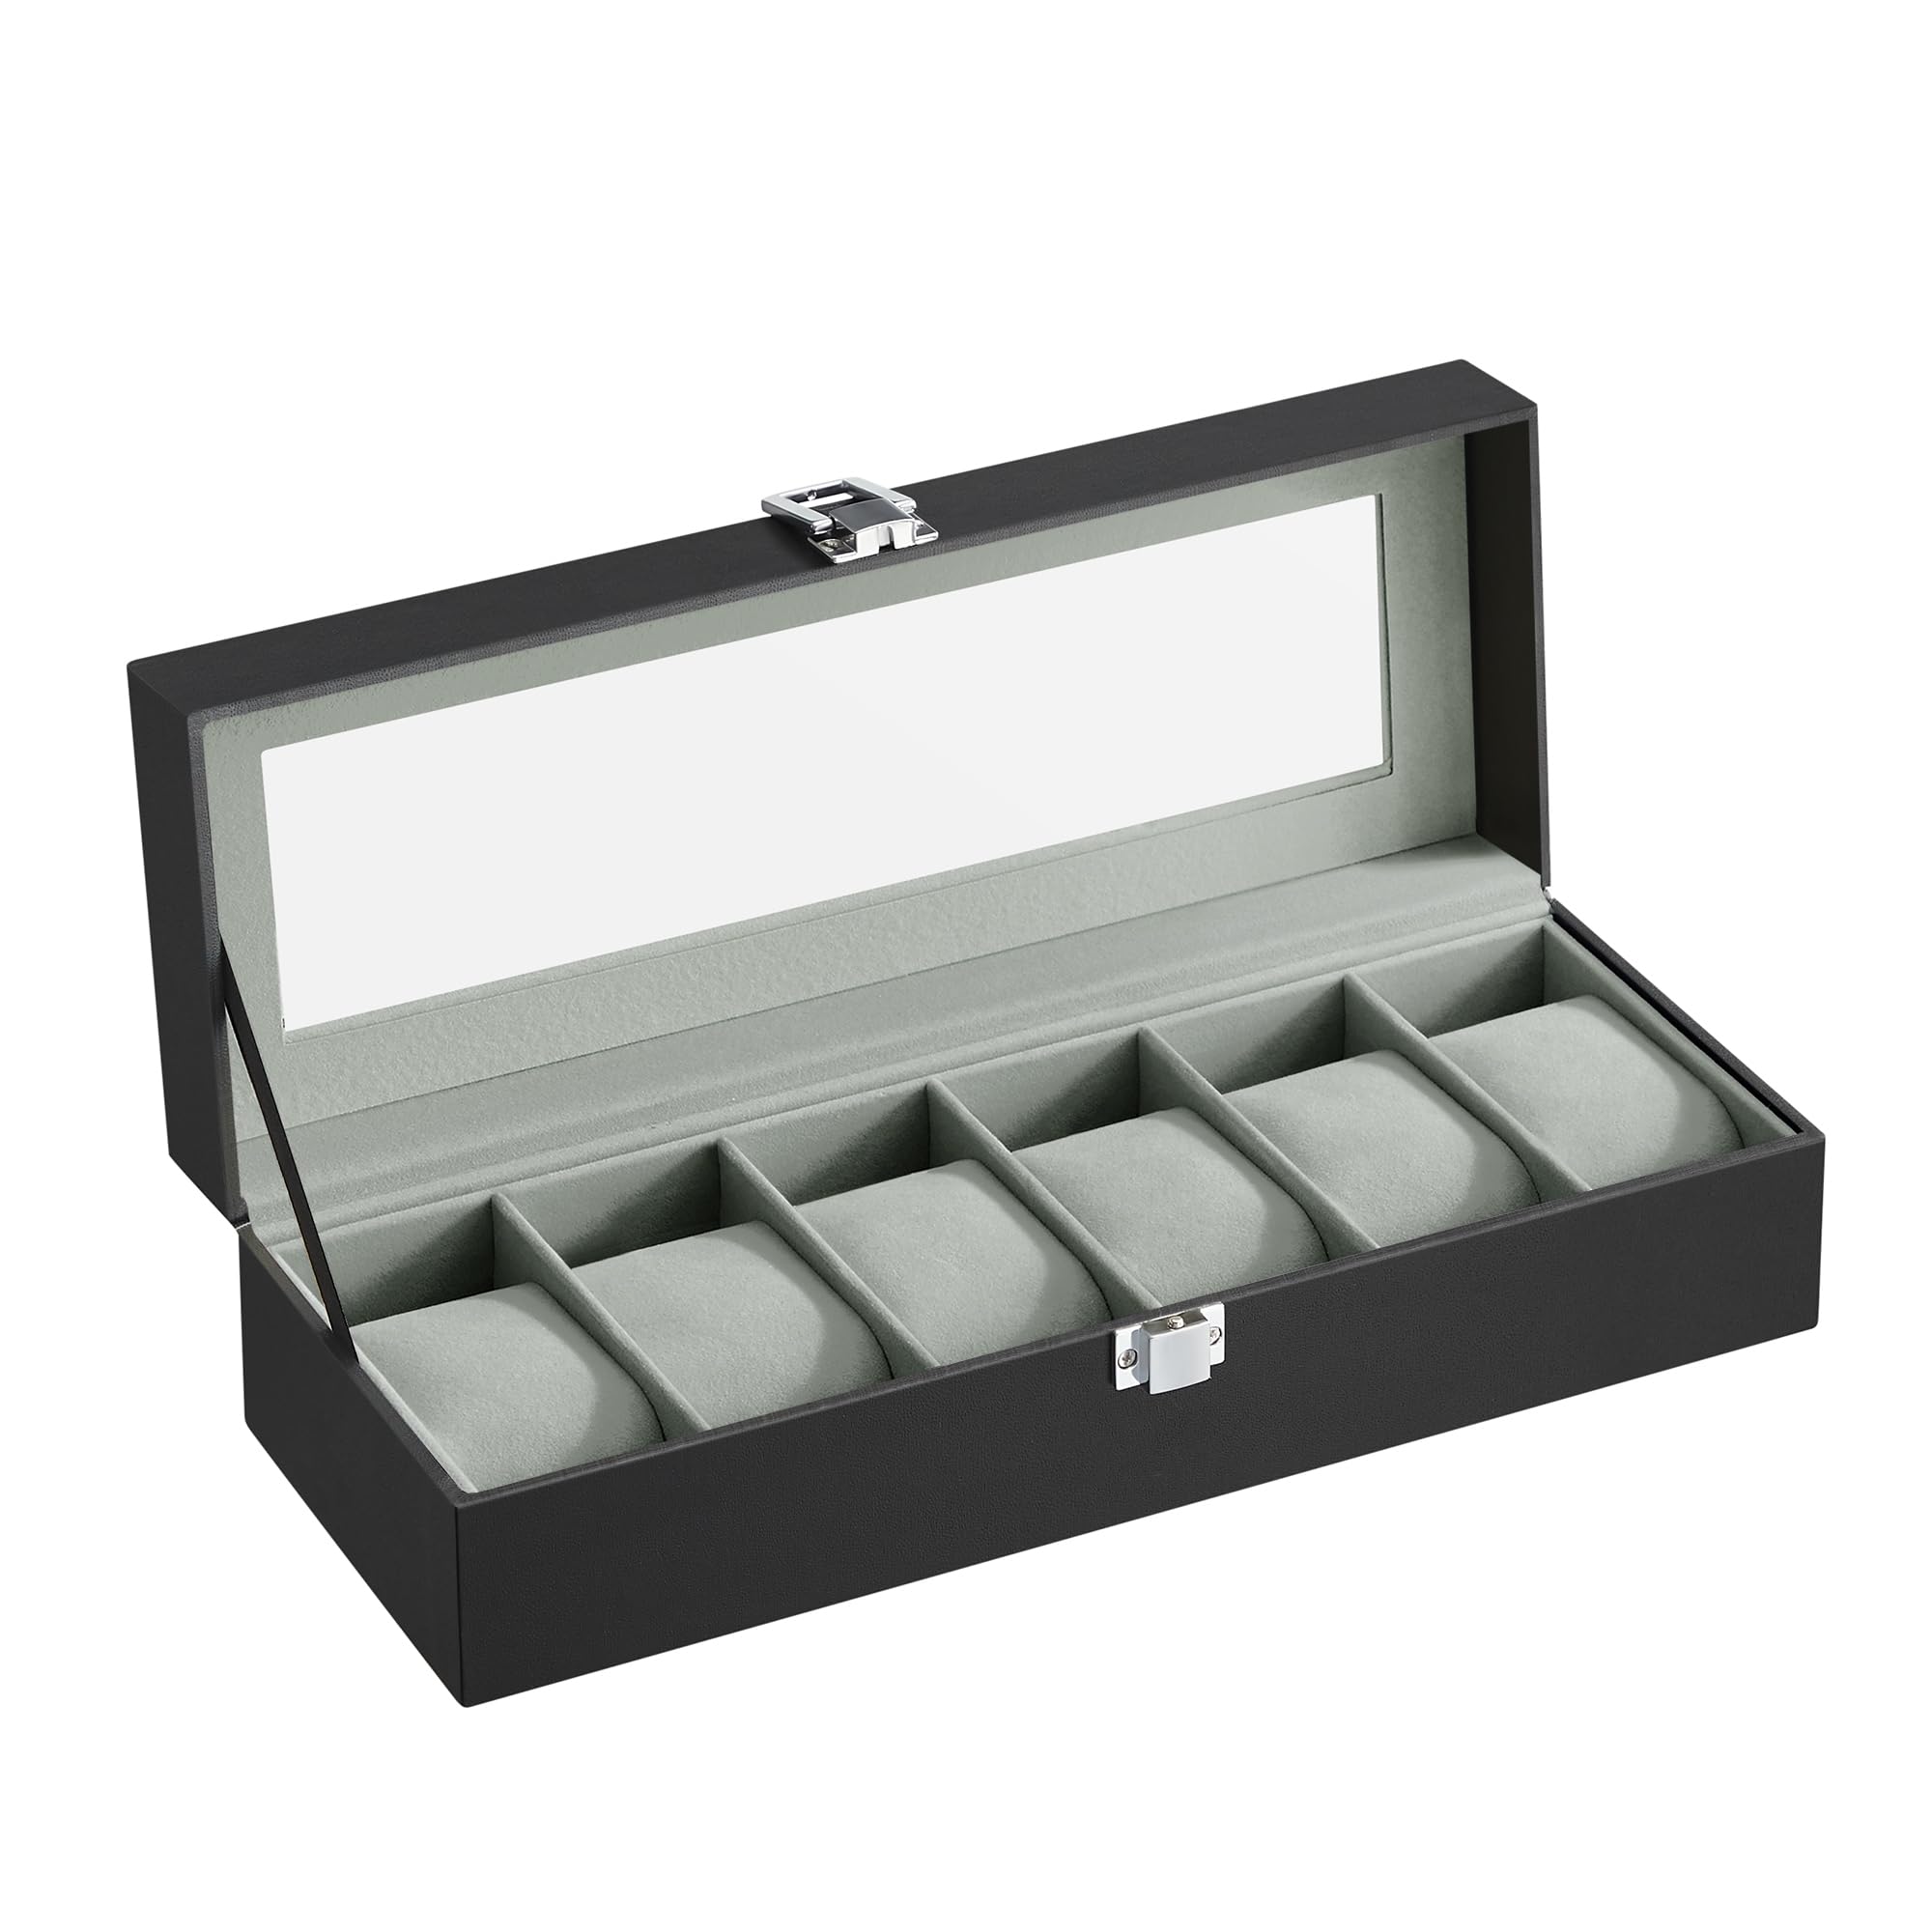 SONGMICS Watch Box, 6-Slot Watch Case with Large Glass Lid, Removable Watch Pillows, Watch Box Organizer, Gift for Loved Ones, Black Synthetic Leather, Gray Lining UJWB06BK